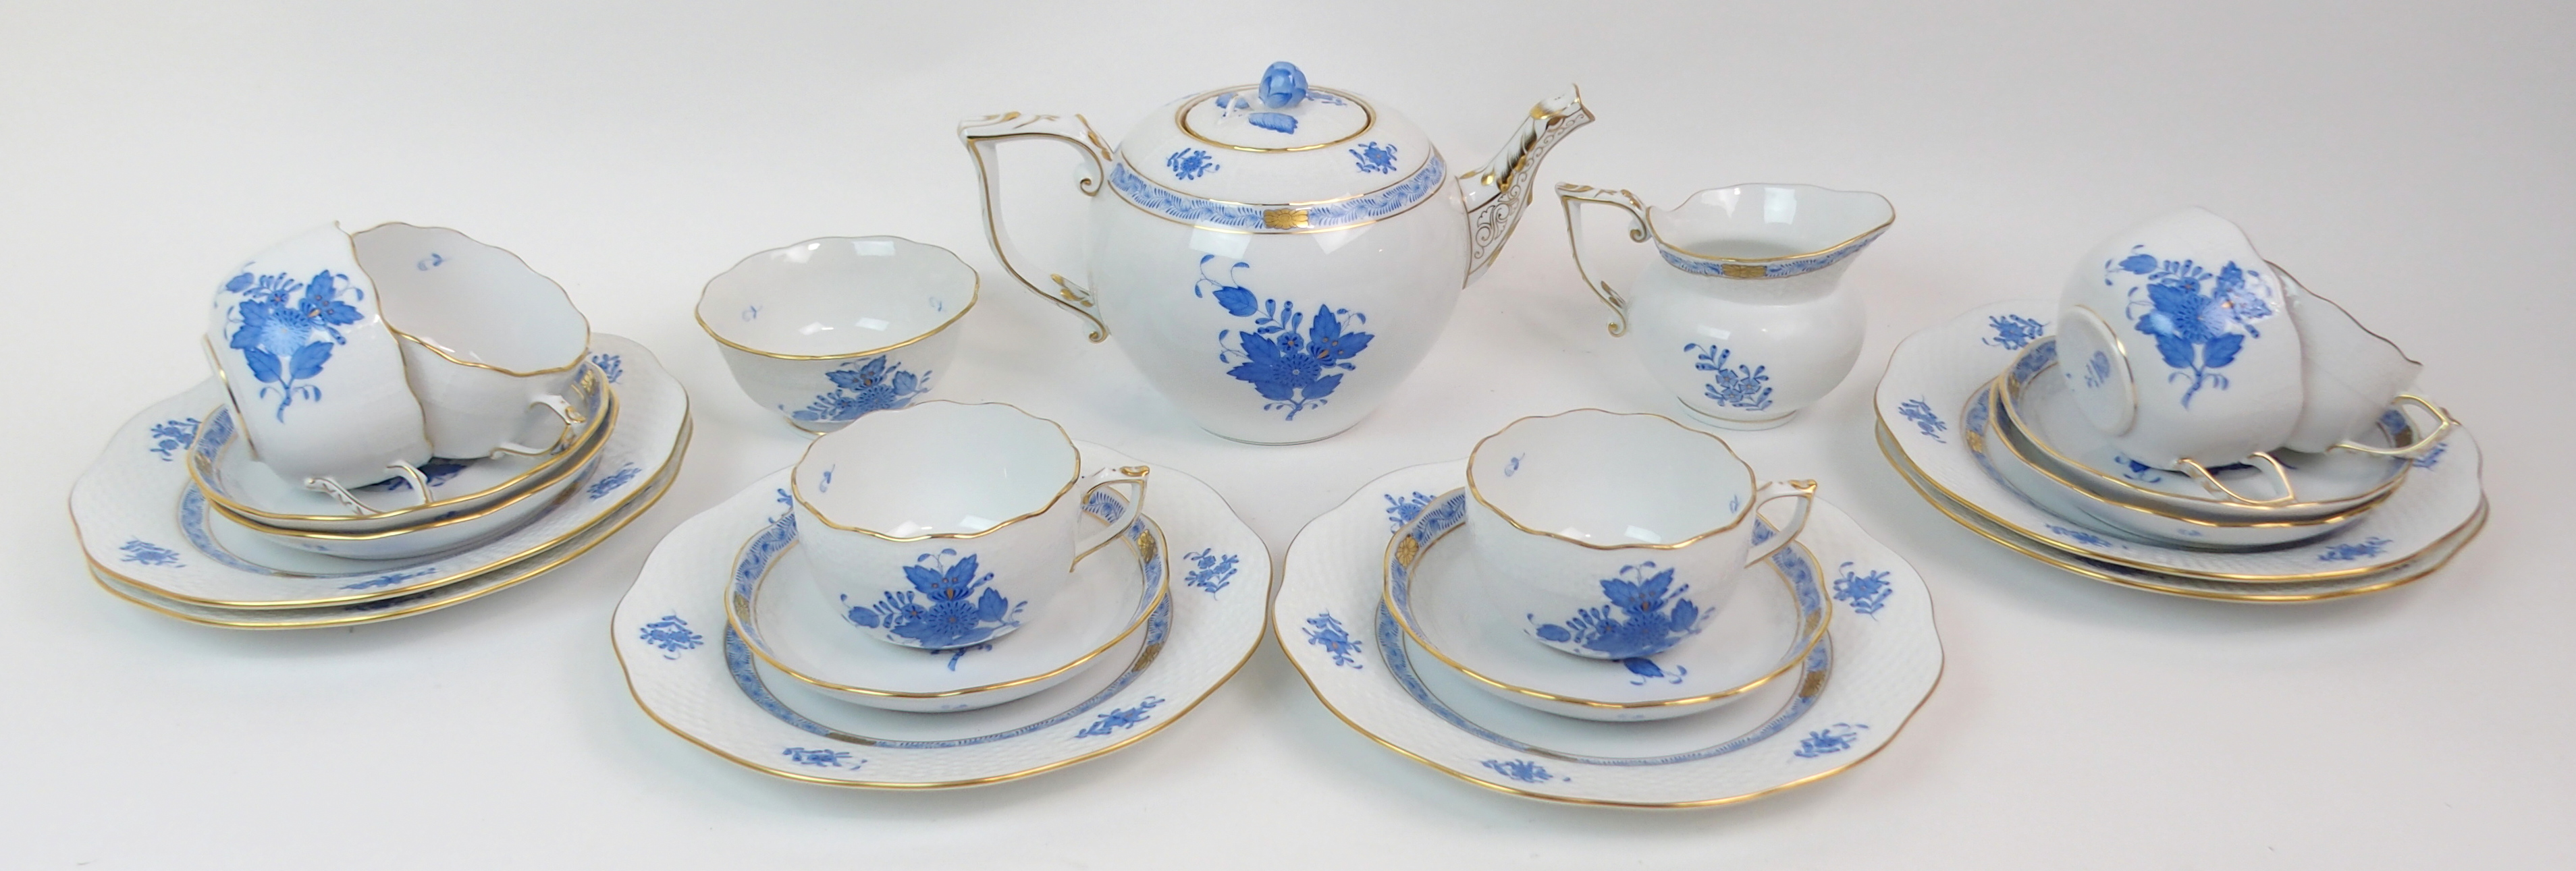 A HEREND CHINESE BOUQUET BLUE PATTERN TEASET comprising teapot, six cups, saucers, plates, milk